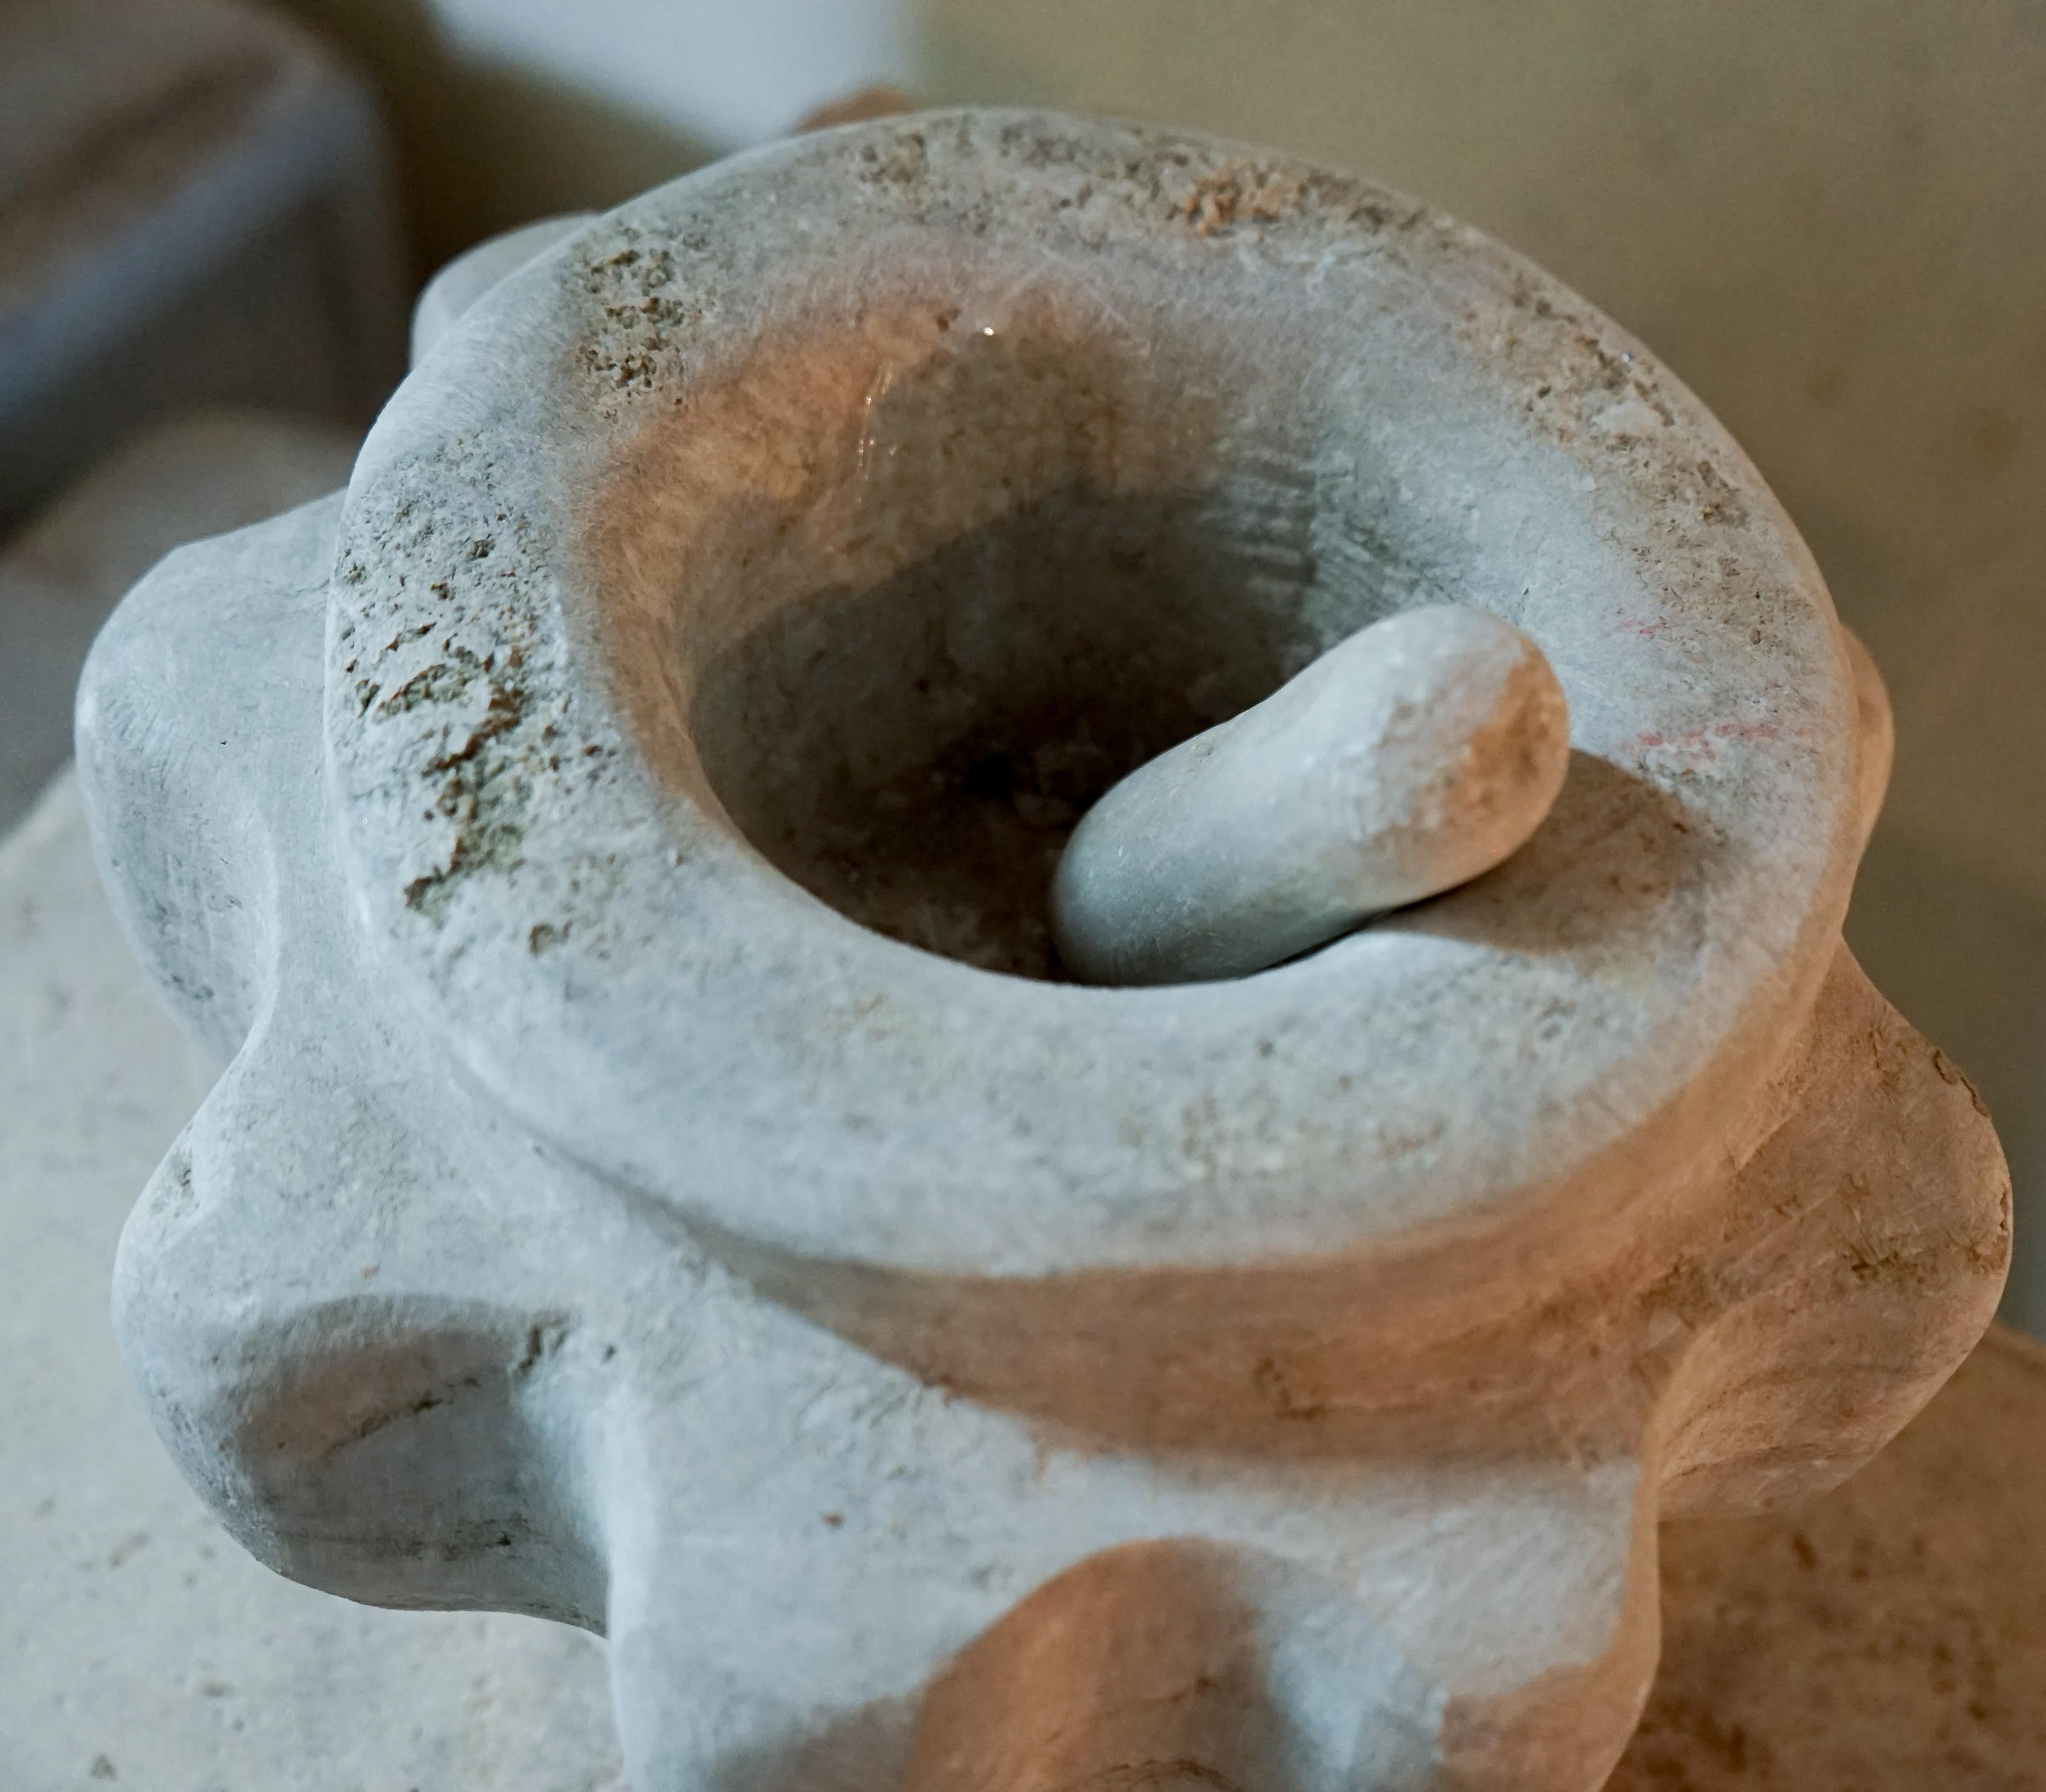 Limestone mortar and pestle from the Greek Islands, historically used for medicinal purposes or in the kitchen for crushing herbs.

Measurements: 11'' D x 6'' H.